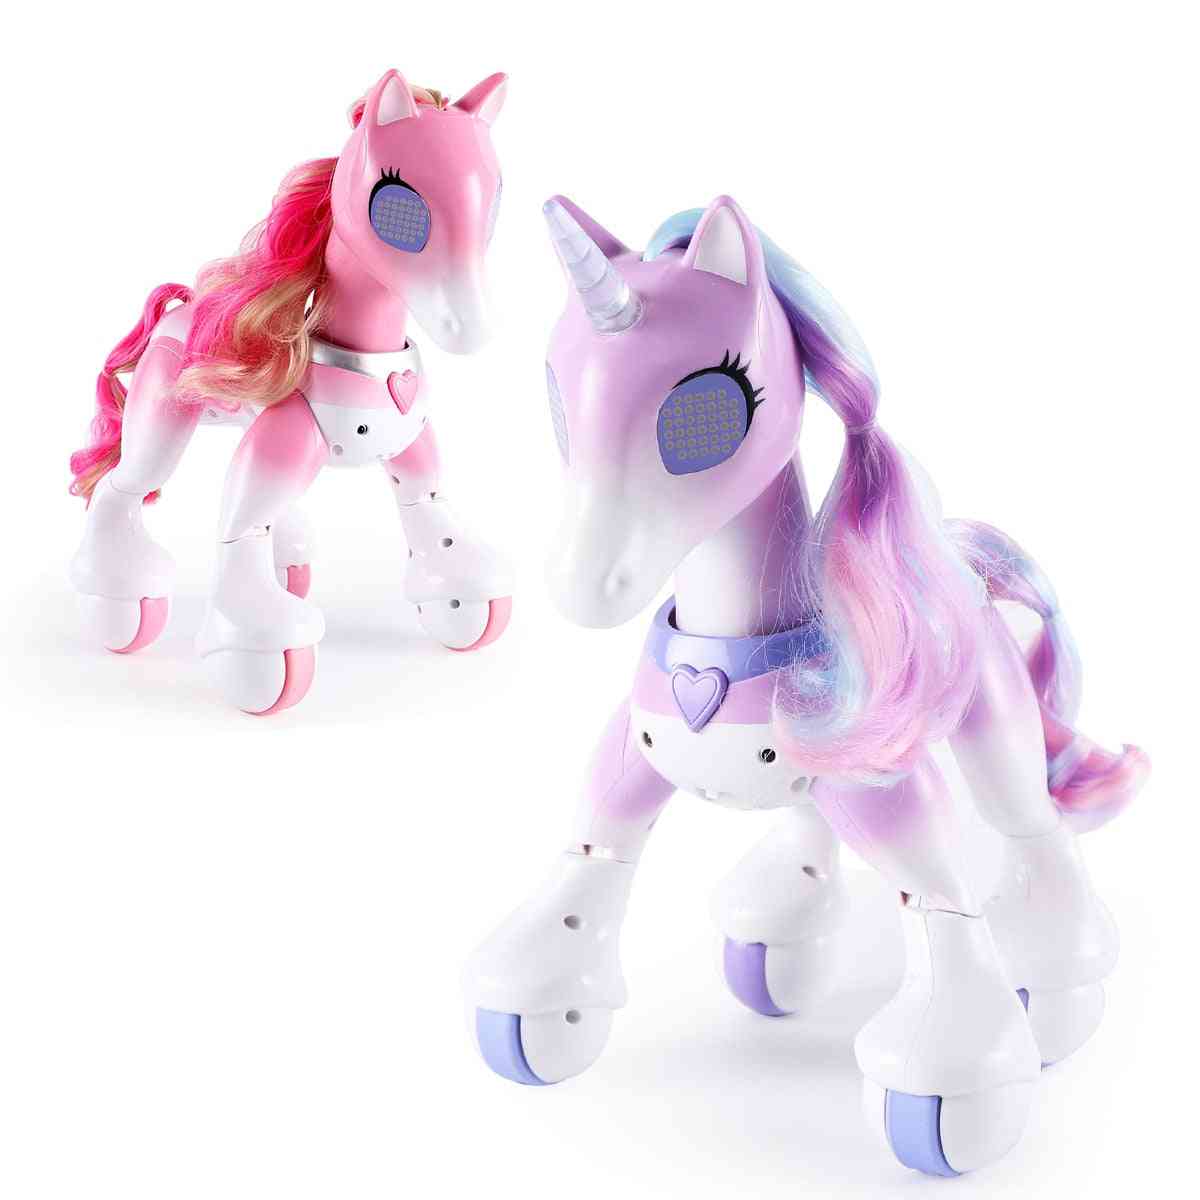 Horse Unicorns, Robot Cute Animal, Induction Remote Control, Electric